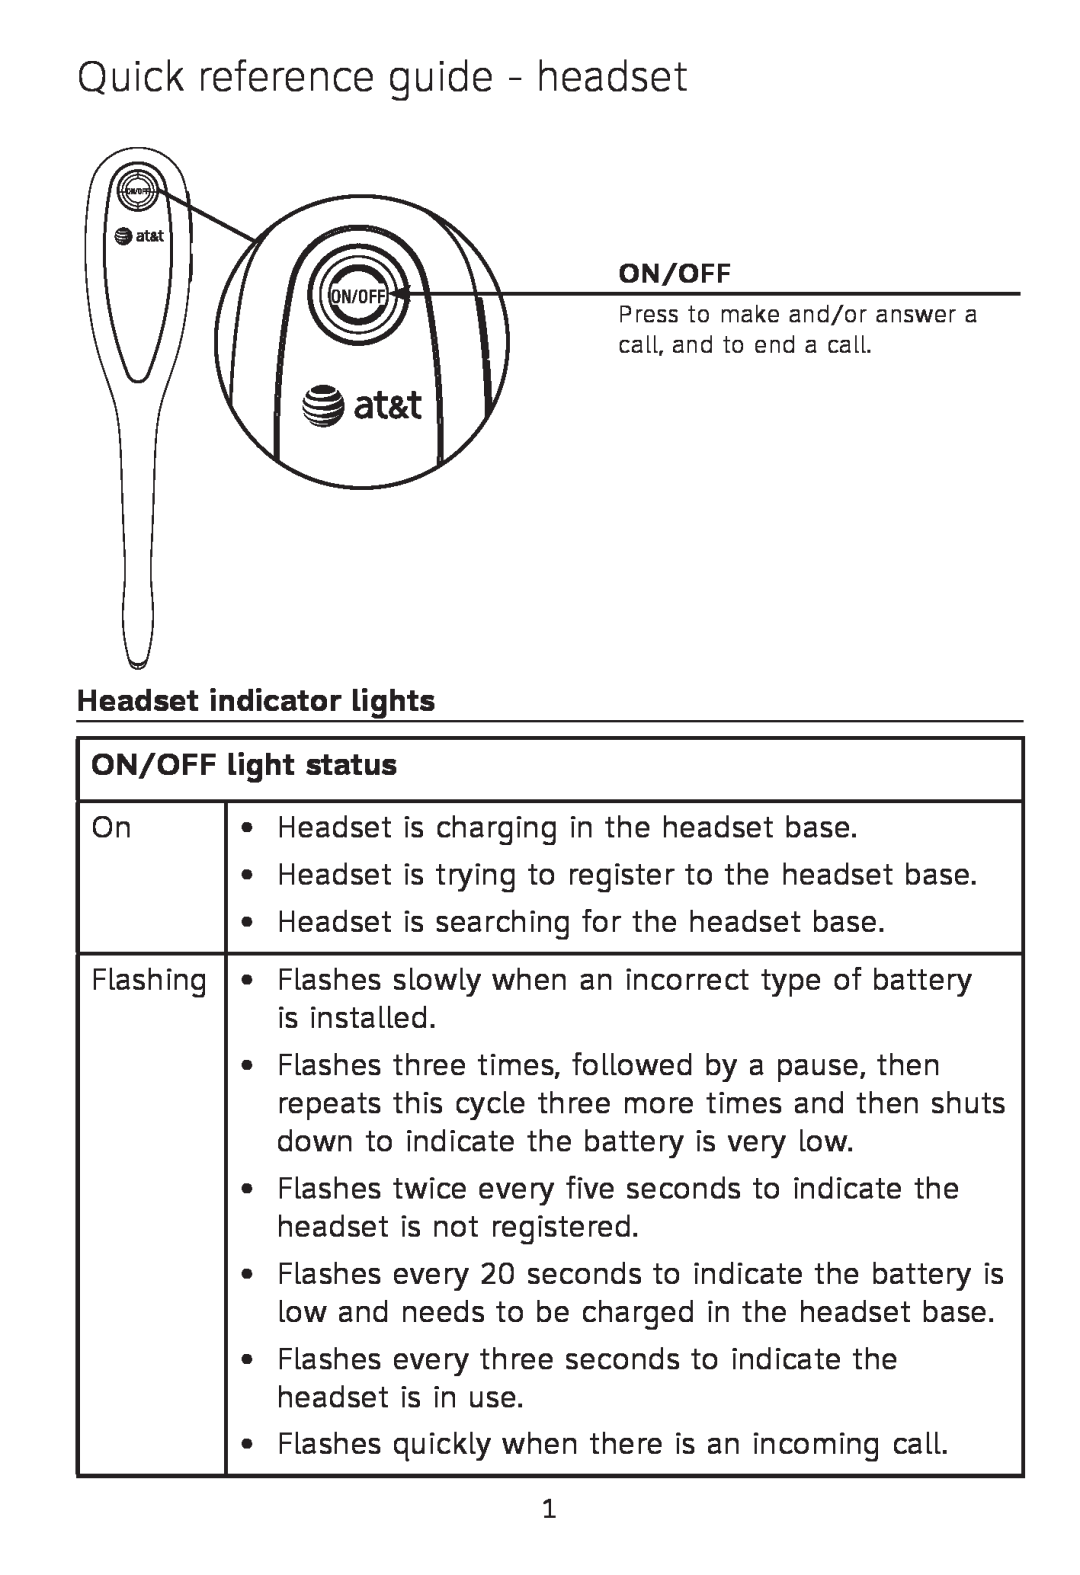 AT&T TL7612 quick start Quick reference guide - headset, Headset indicator lights ON/OFF light status 